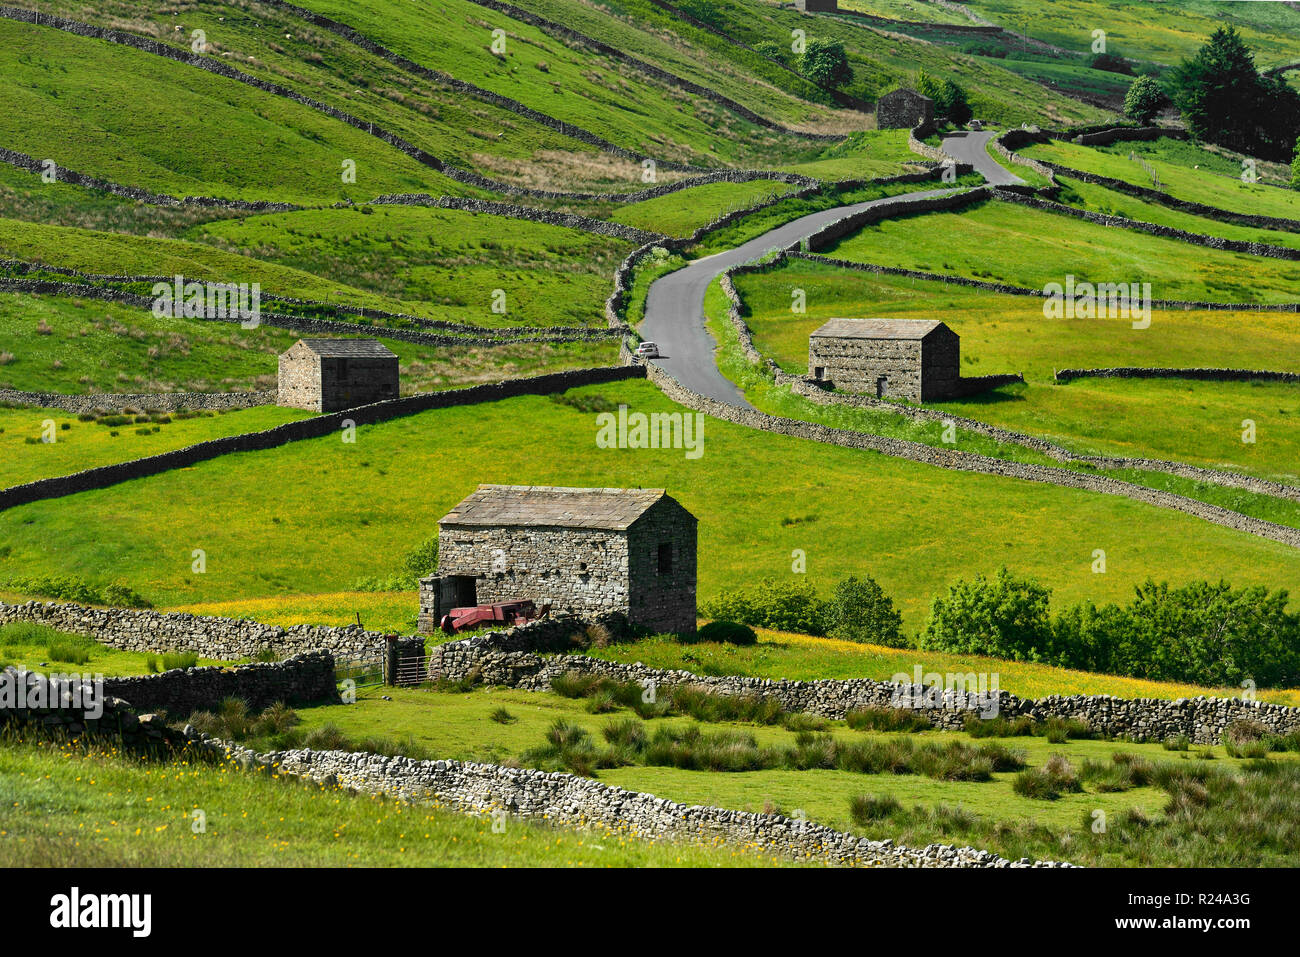 Meadows with field barns, Swaledale, Yorkshire Dales National Park, North Yorkshire, England, United Kingdom, Europe Stock Photo